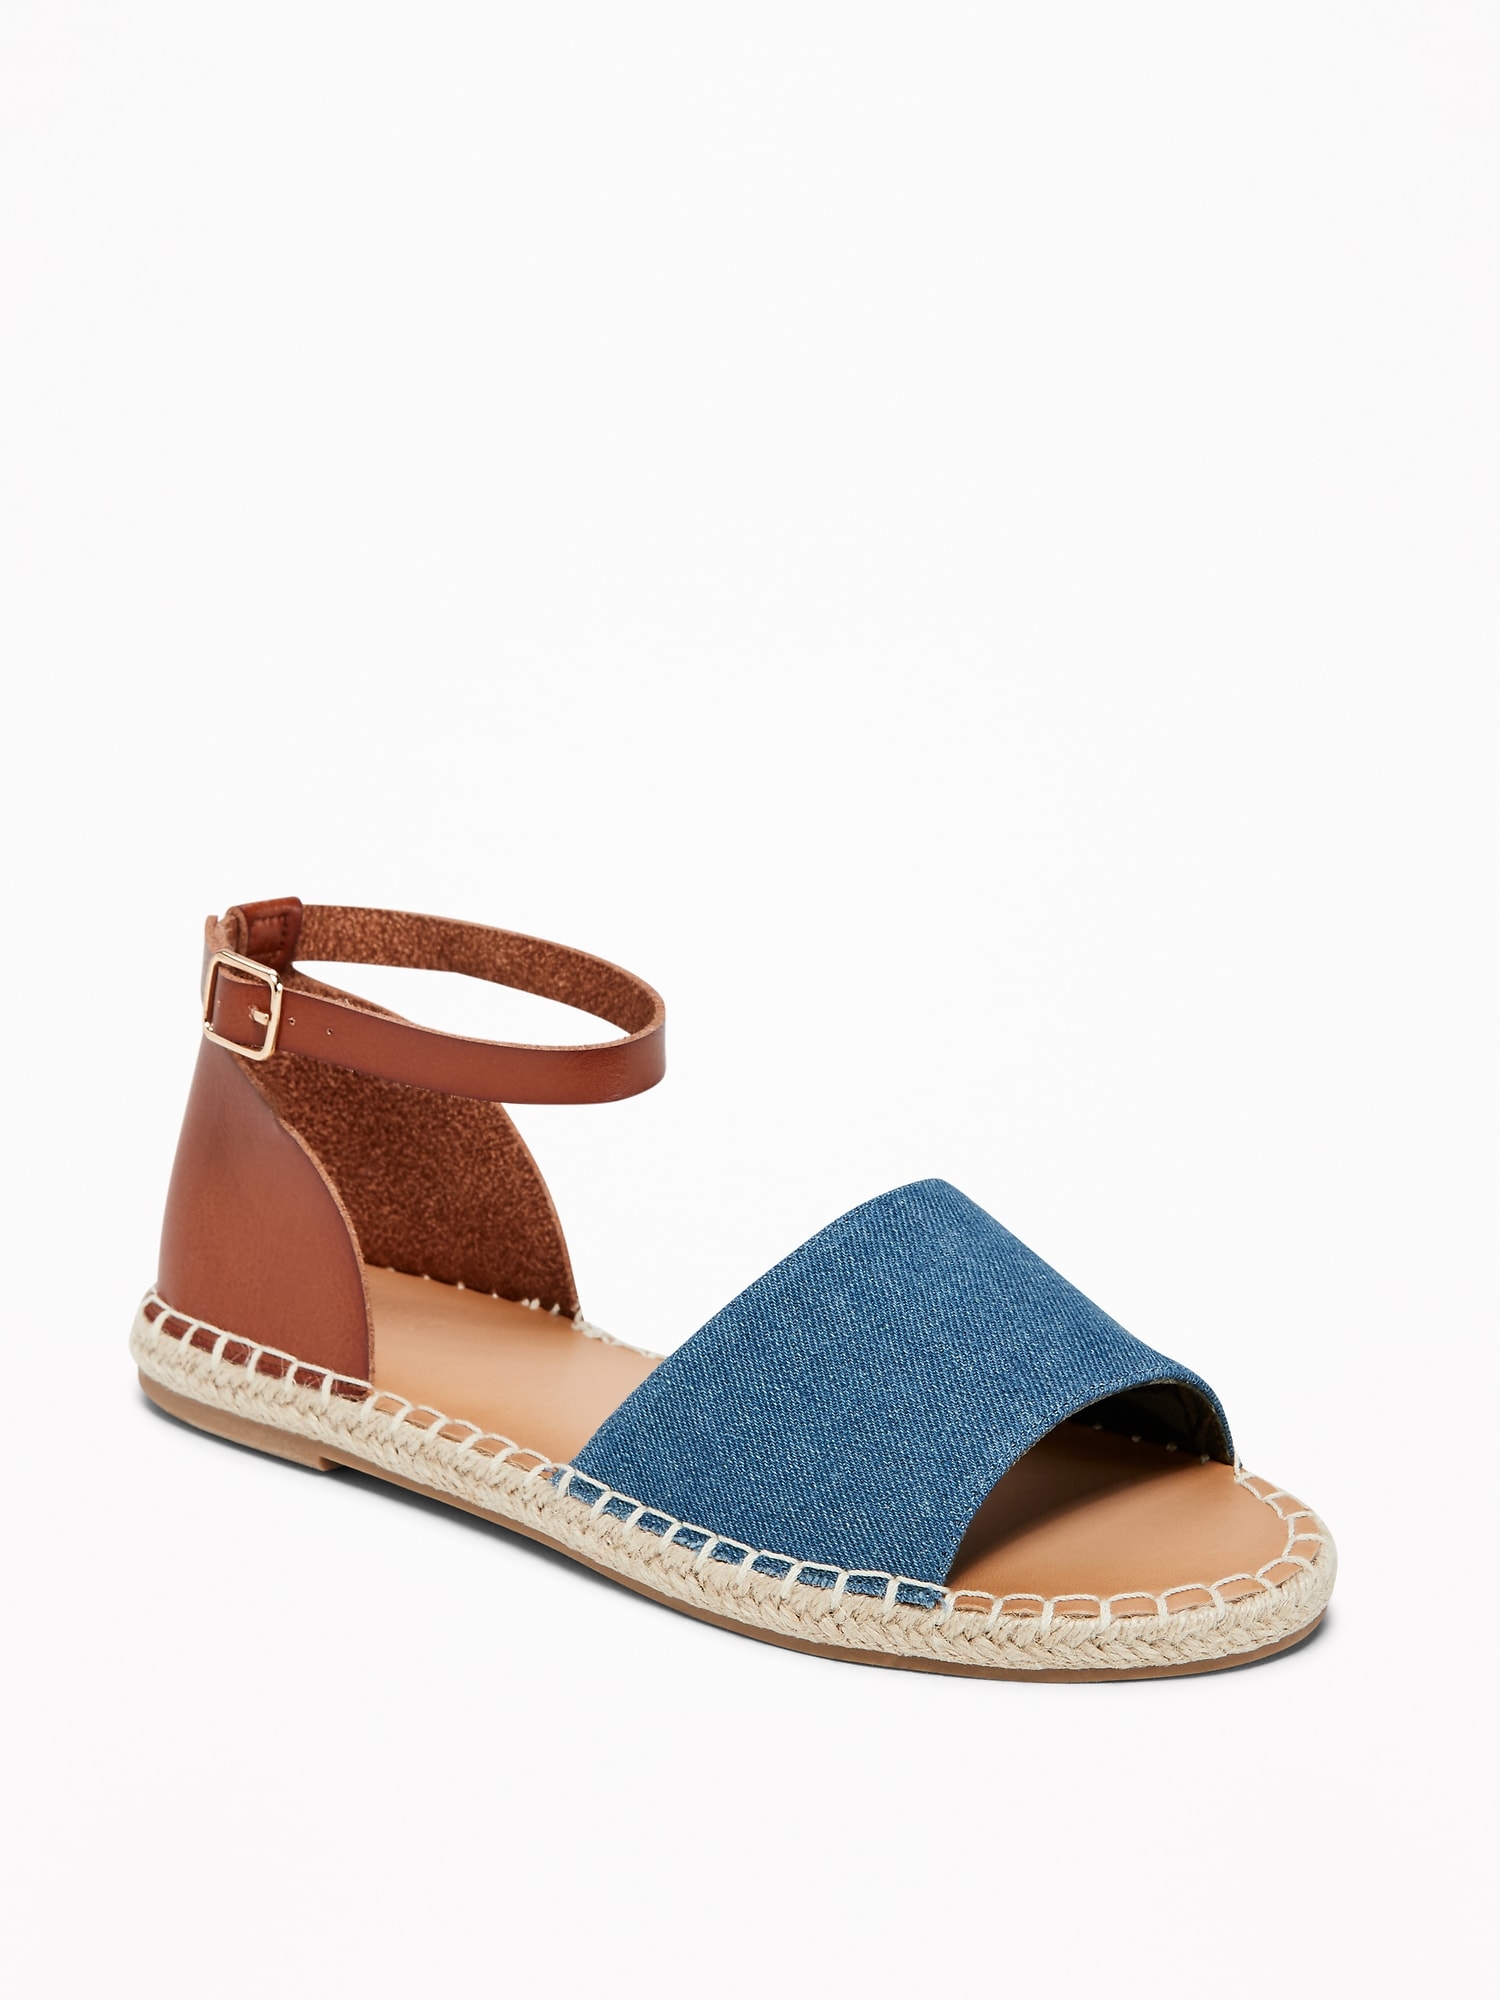 Denim/Faux-Leather Espadrille Sandals for Women | Old Navy